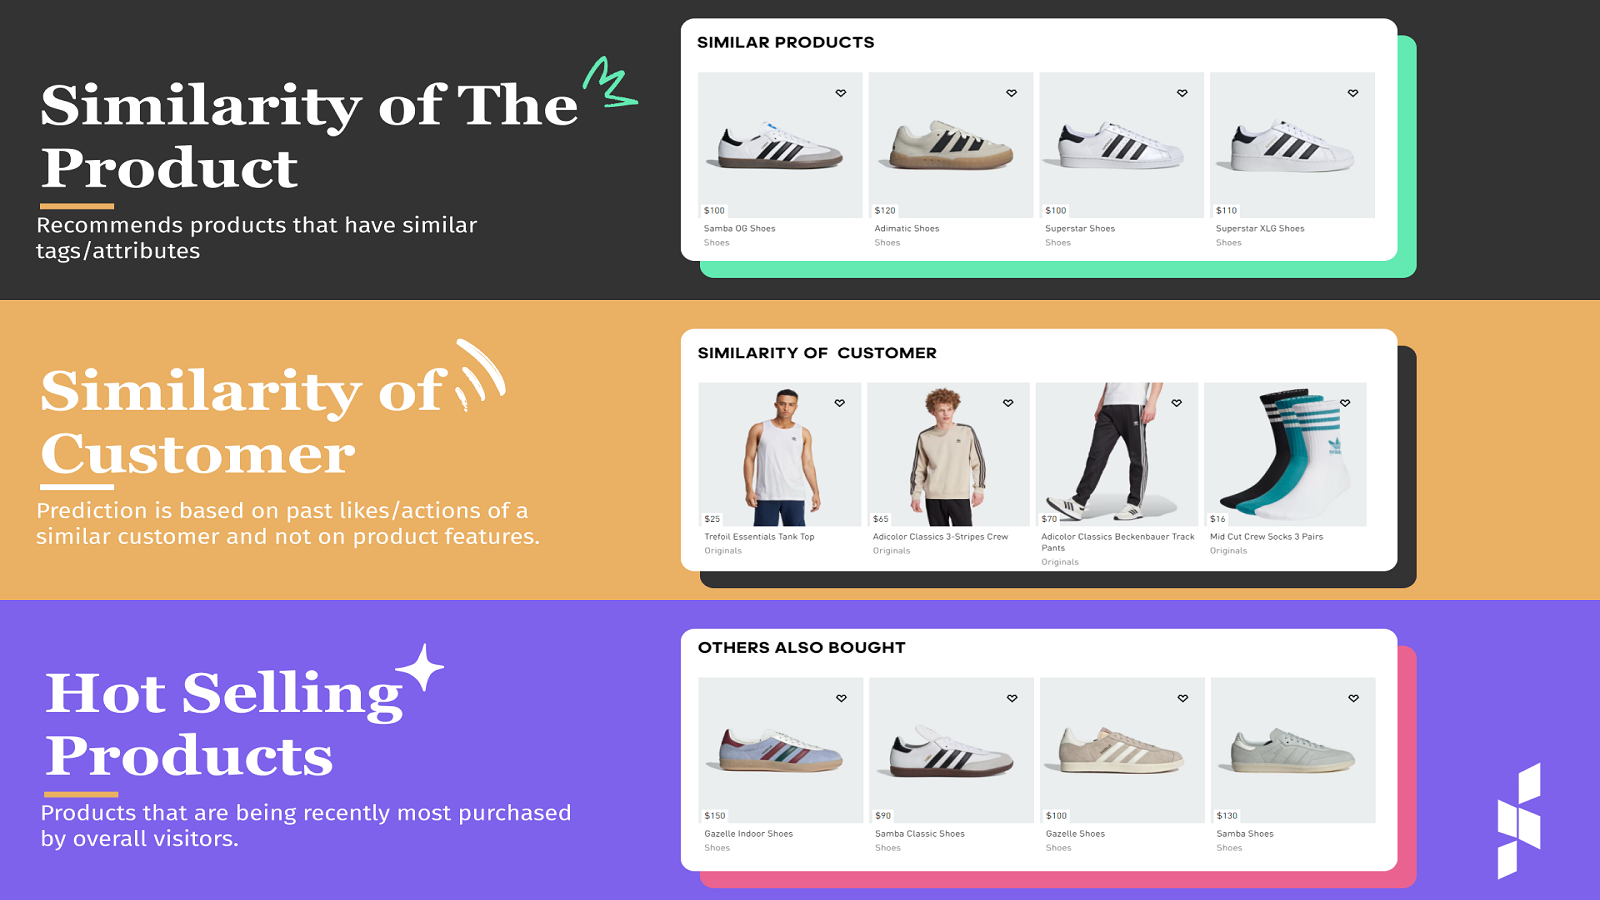 Shopcast: Product Recommender